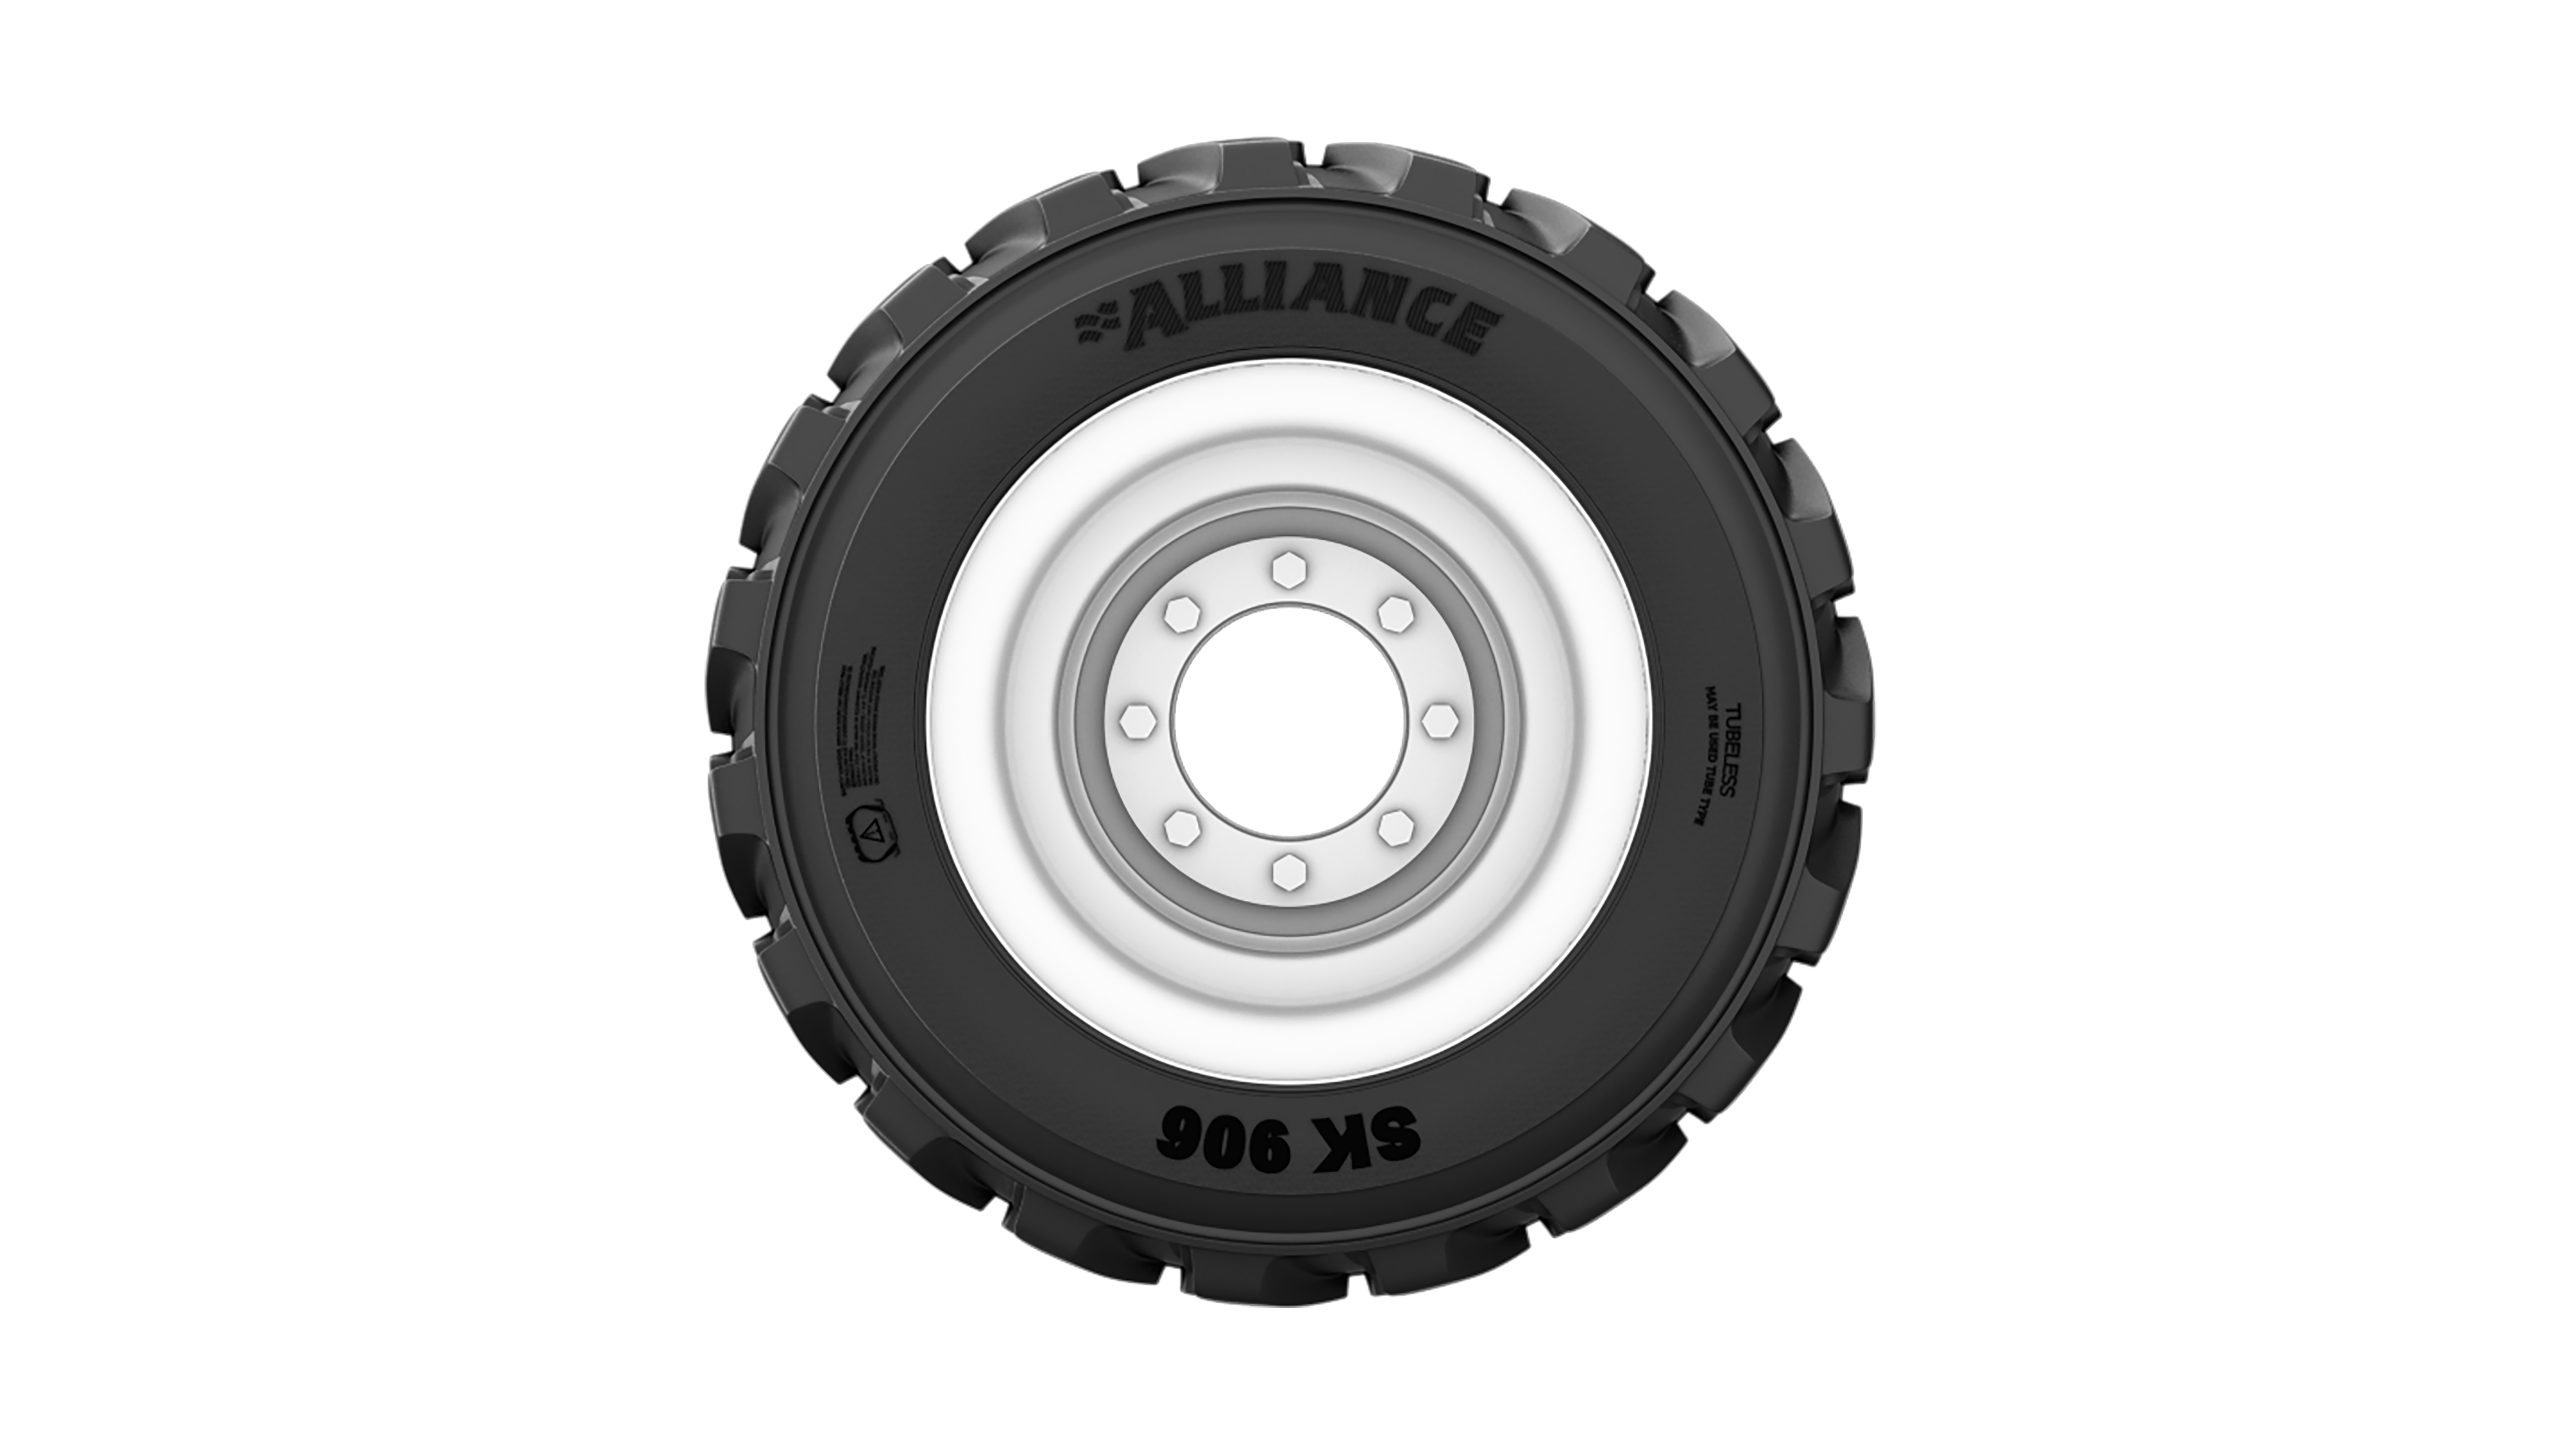 SK-906 ALLIANCE CONSTRUCTION & INDUSTRIAL Tire